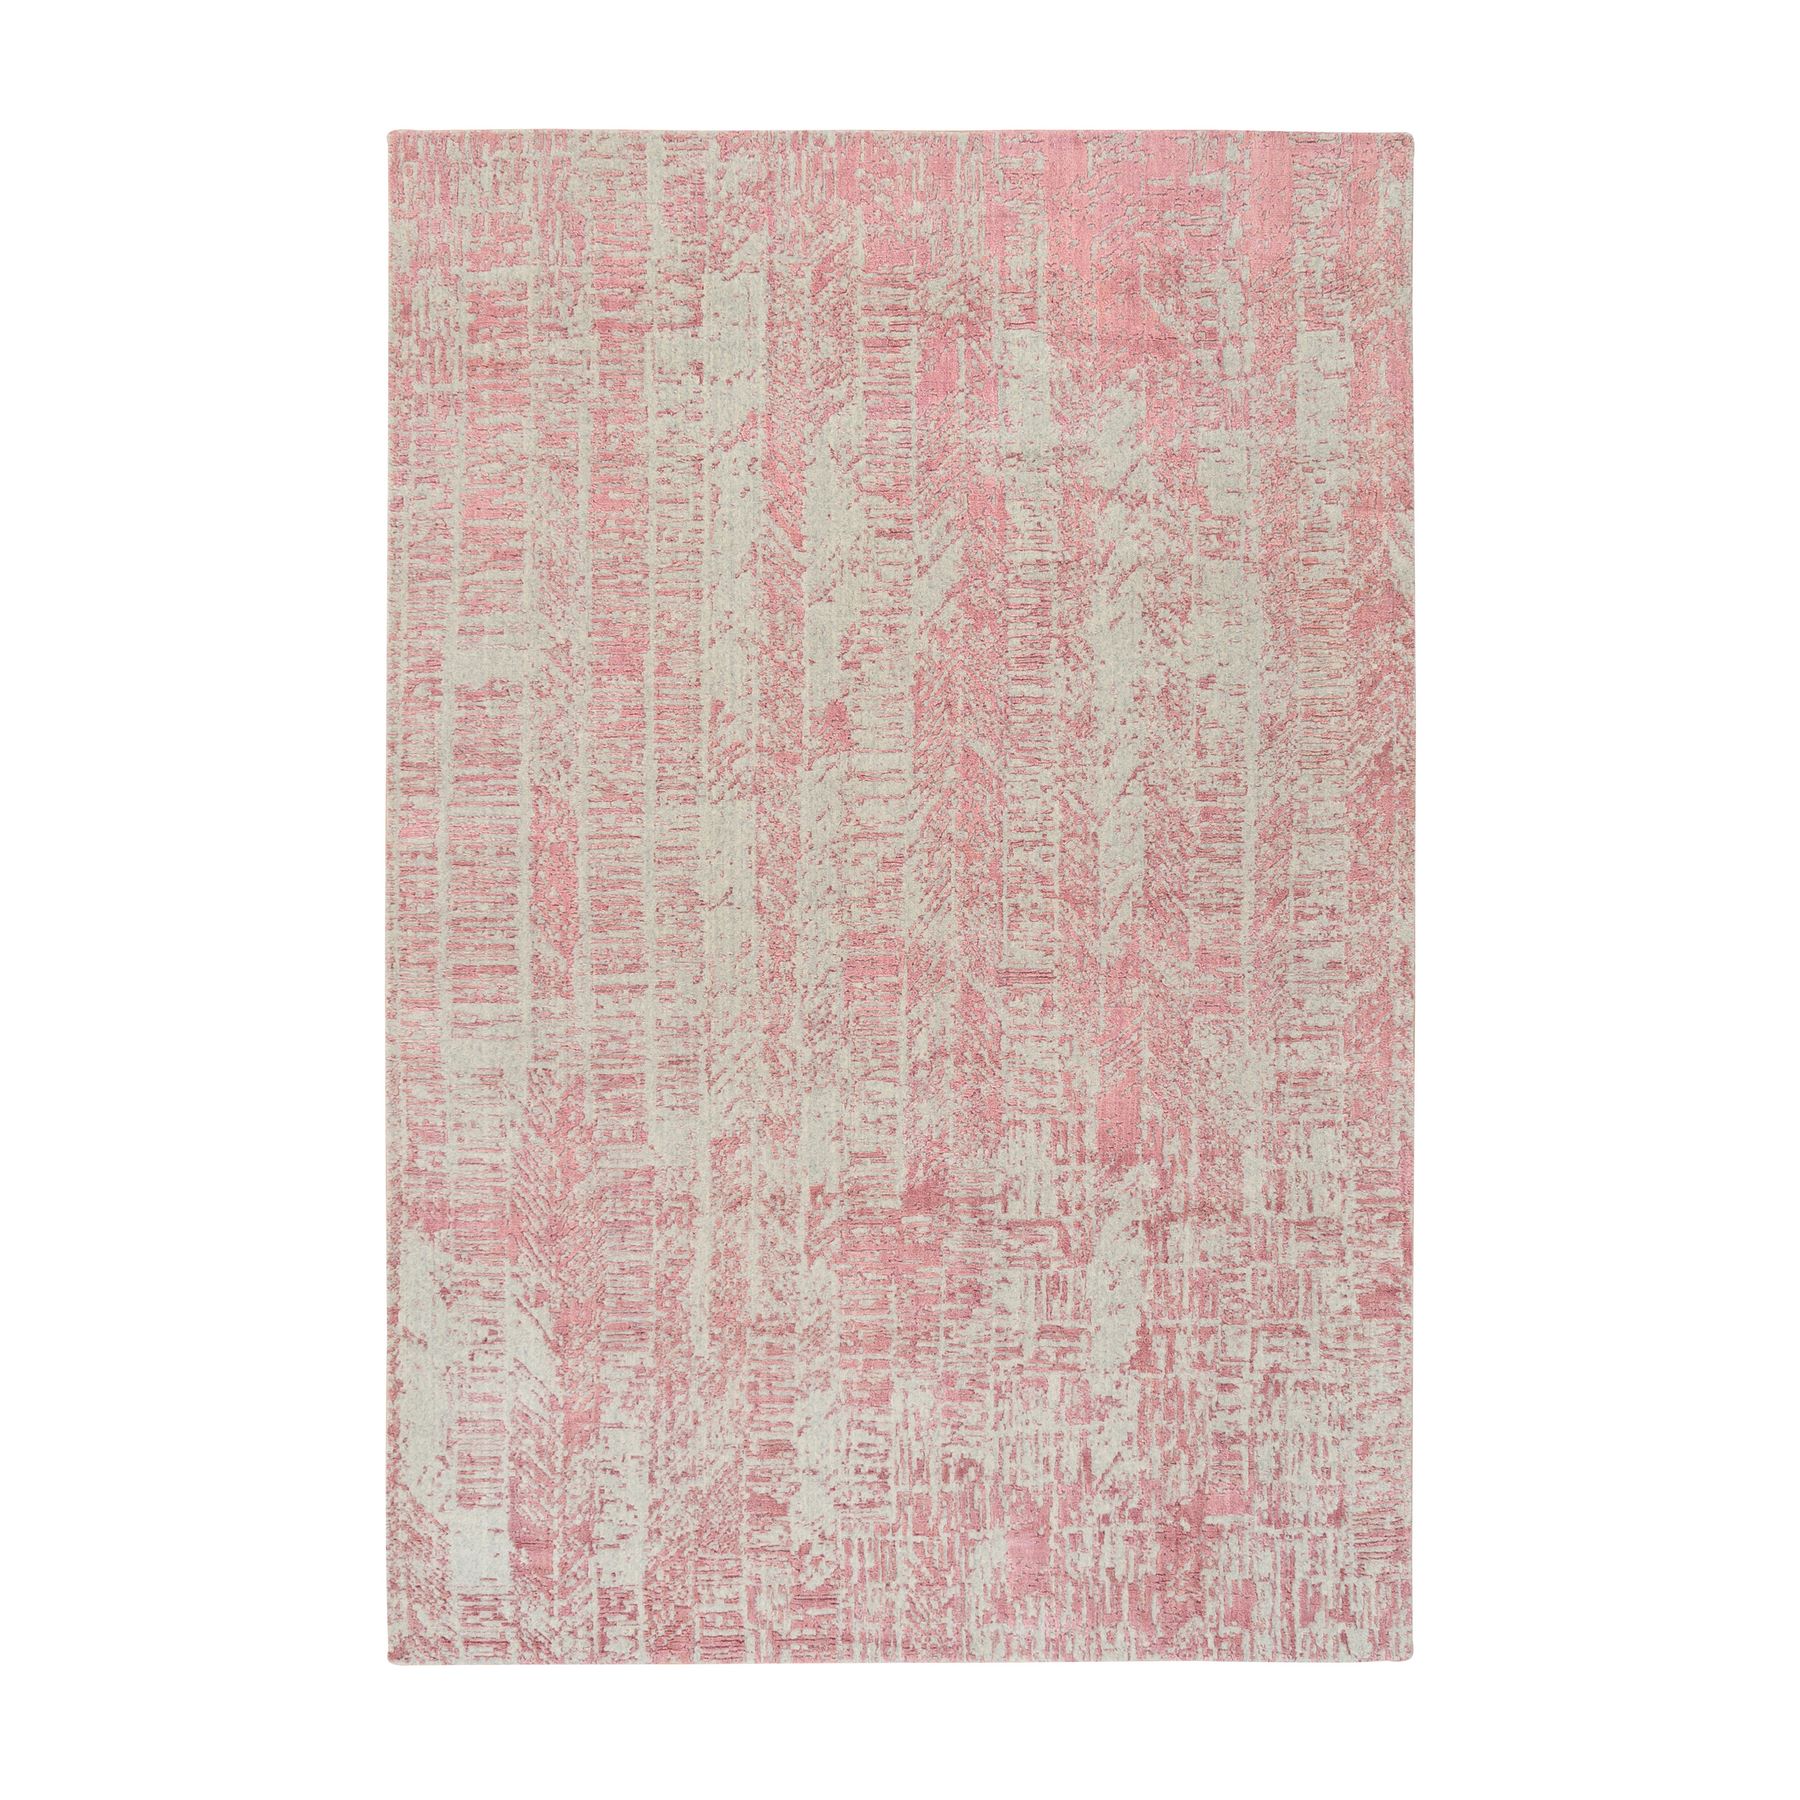 6'x9'1" Rose Pink, All Over Design, Wool and Art Silk, Jacquard Hand Loomed, Oriental Rug 